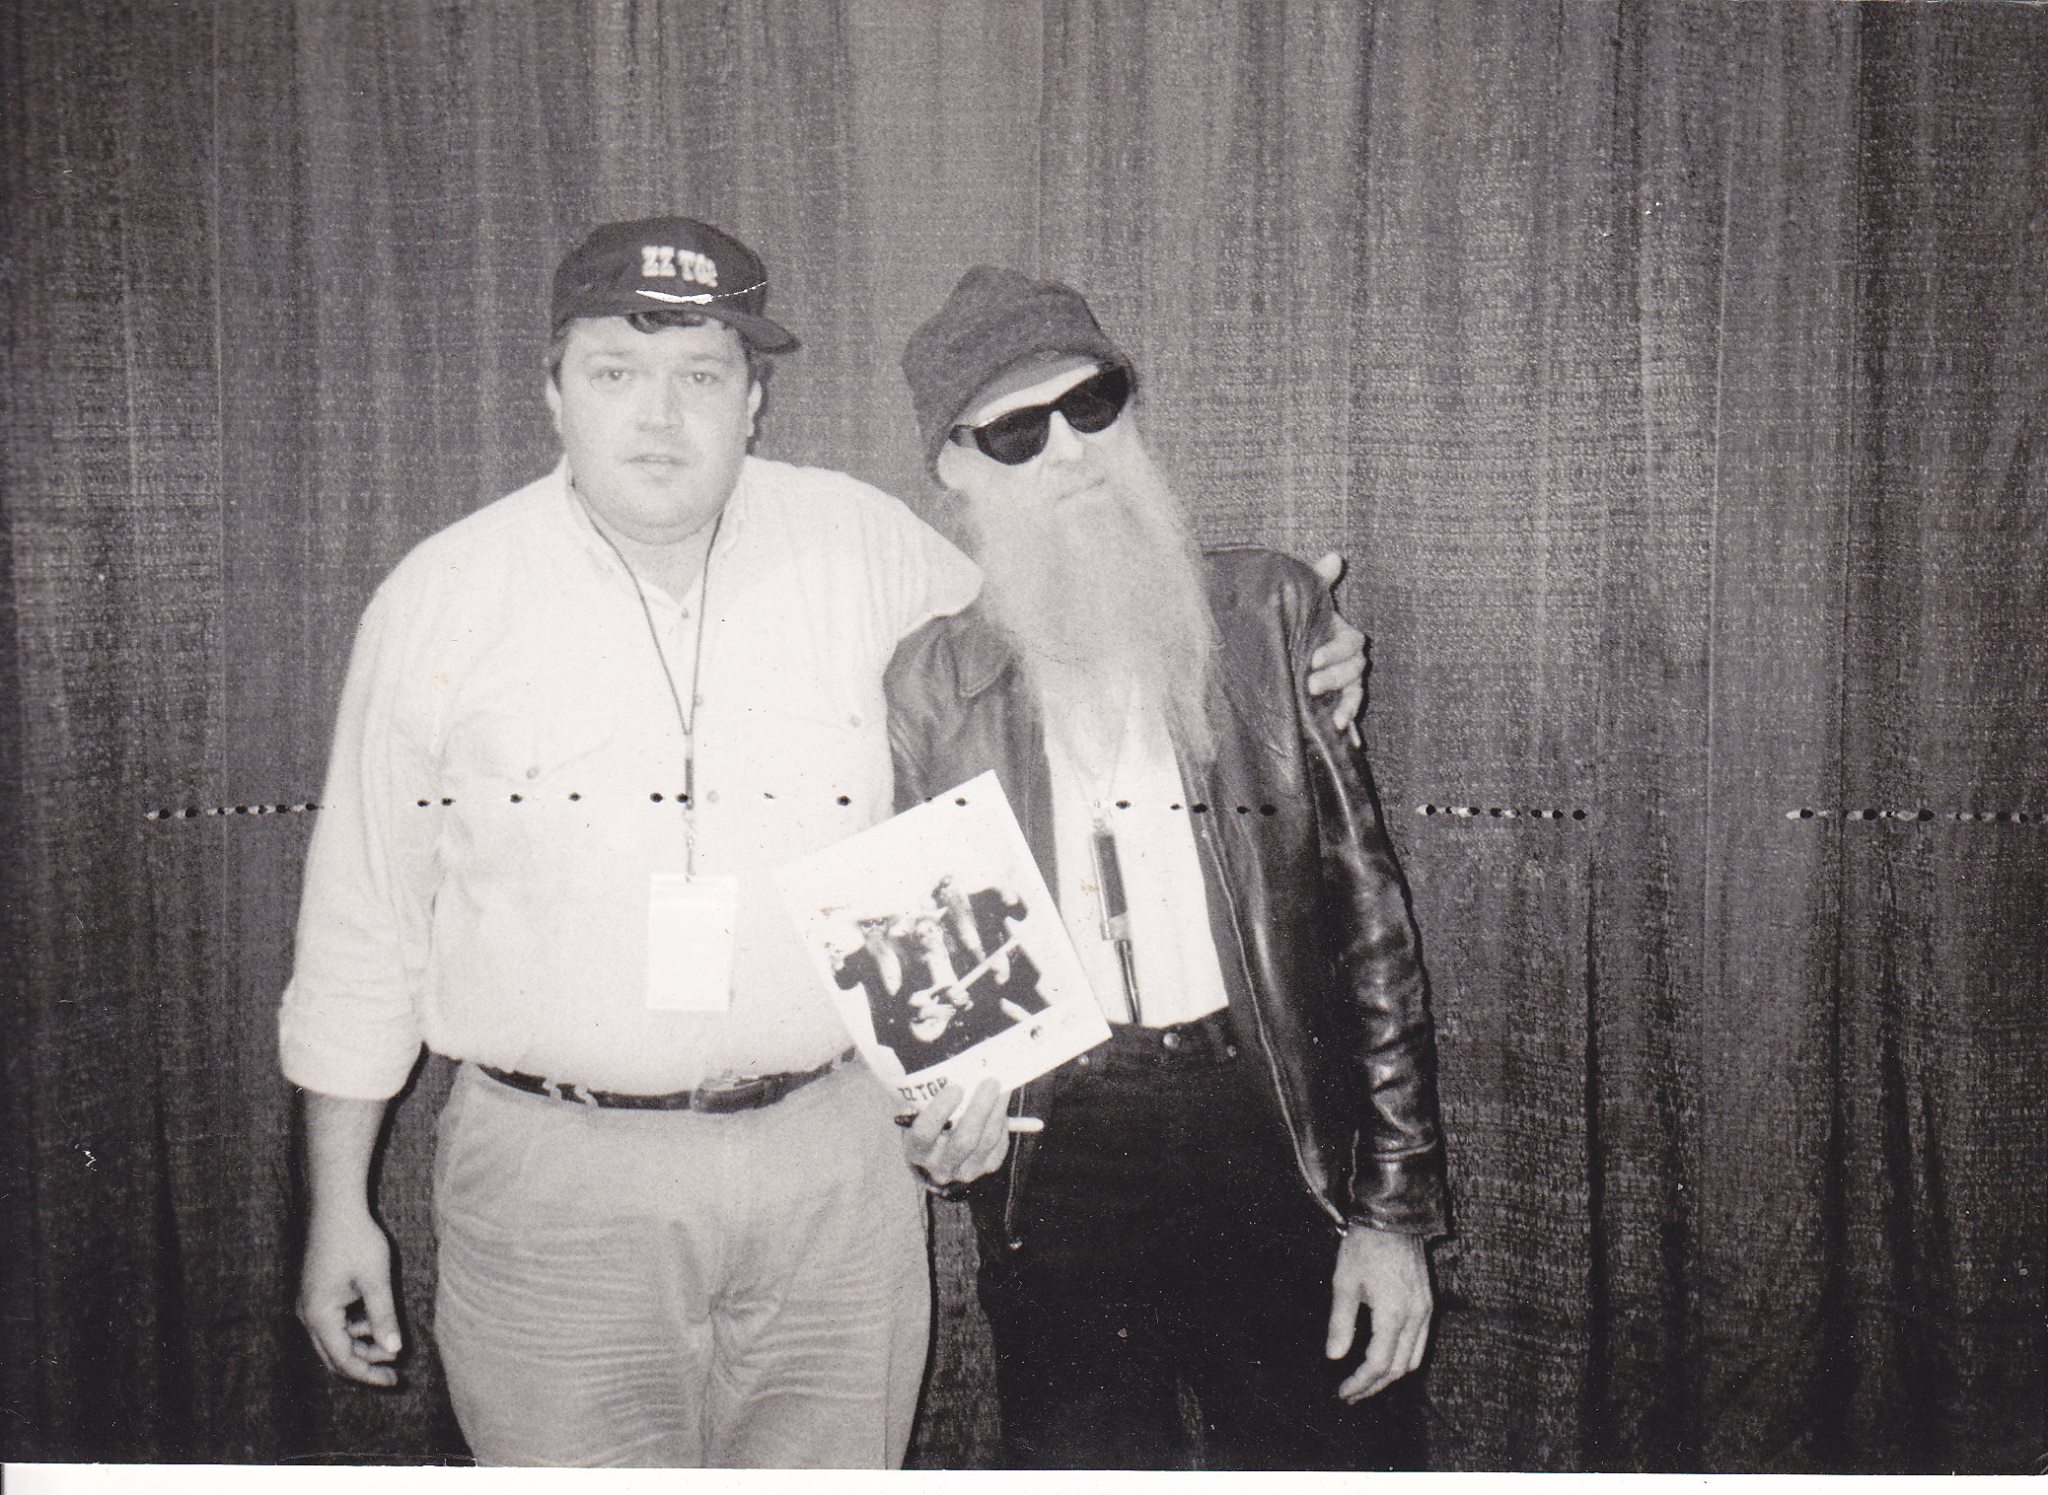 Happy Birthday to one of my favorite guitar players Billy Gibbons from ZZ Top   